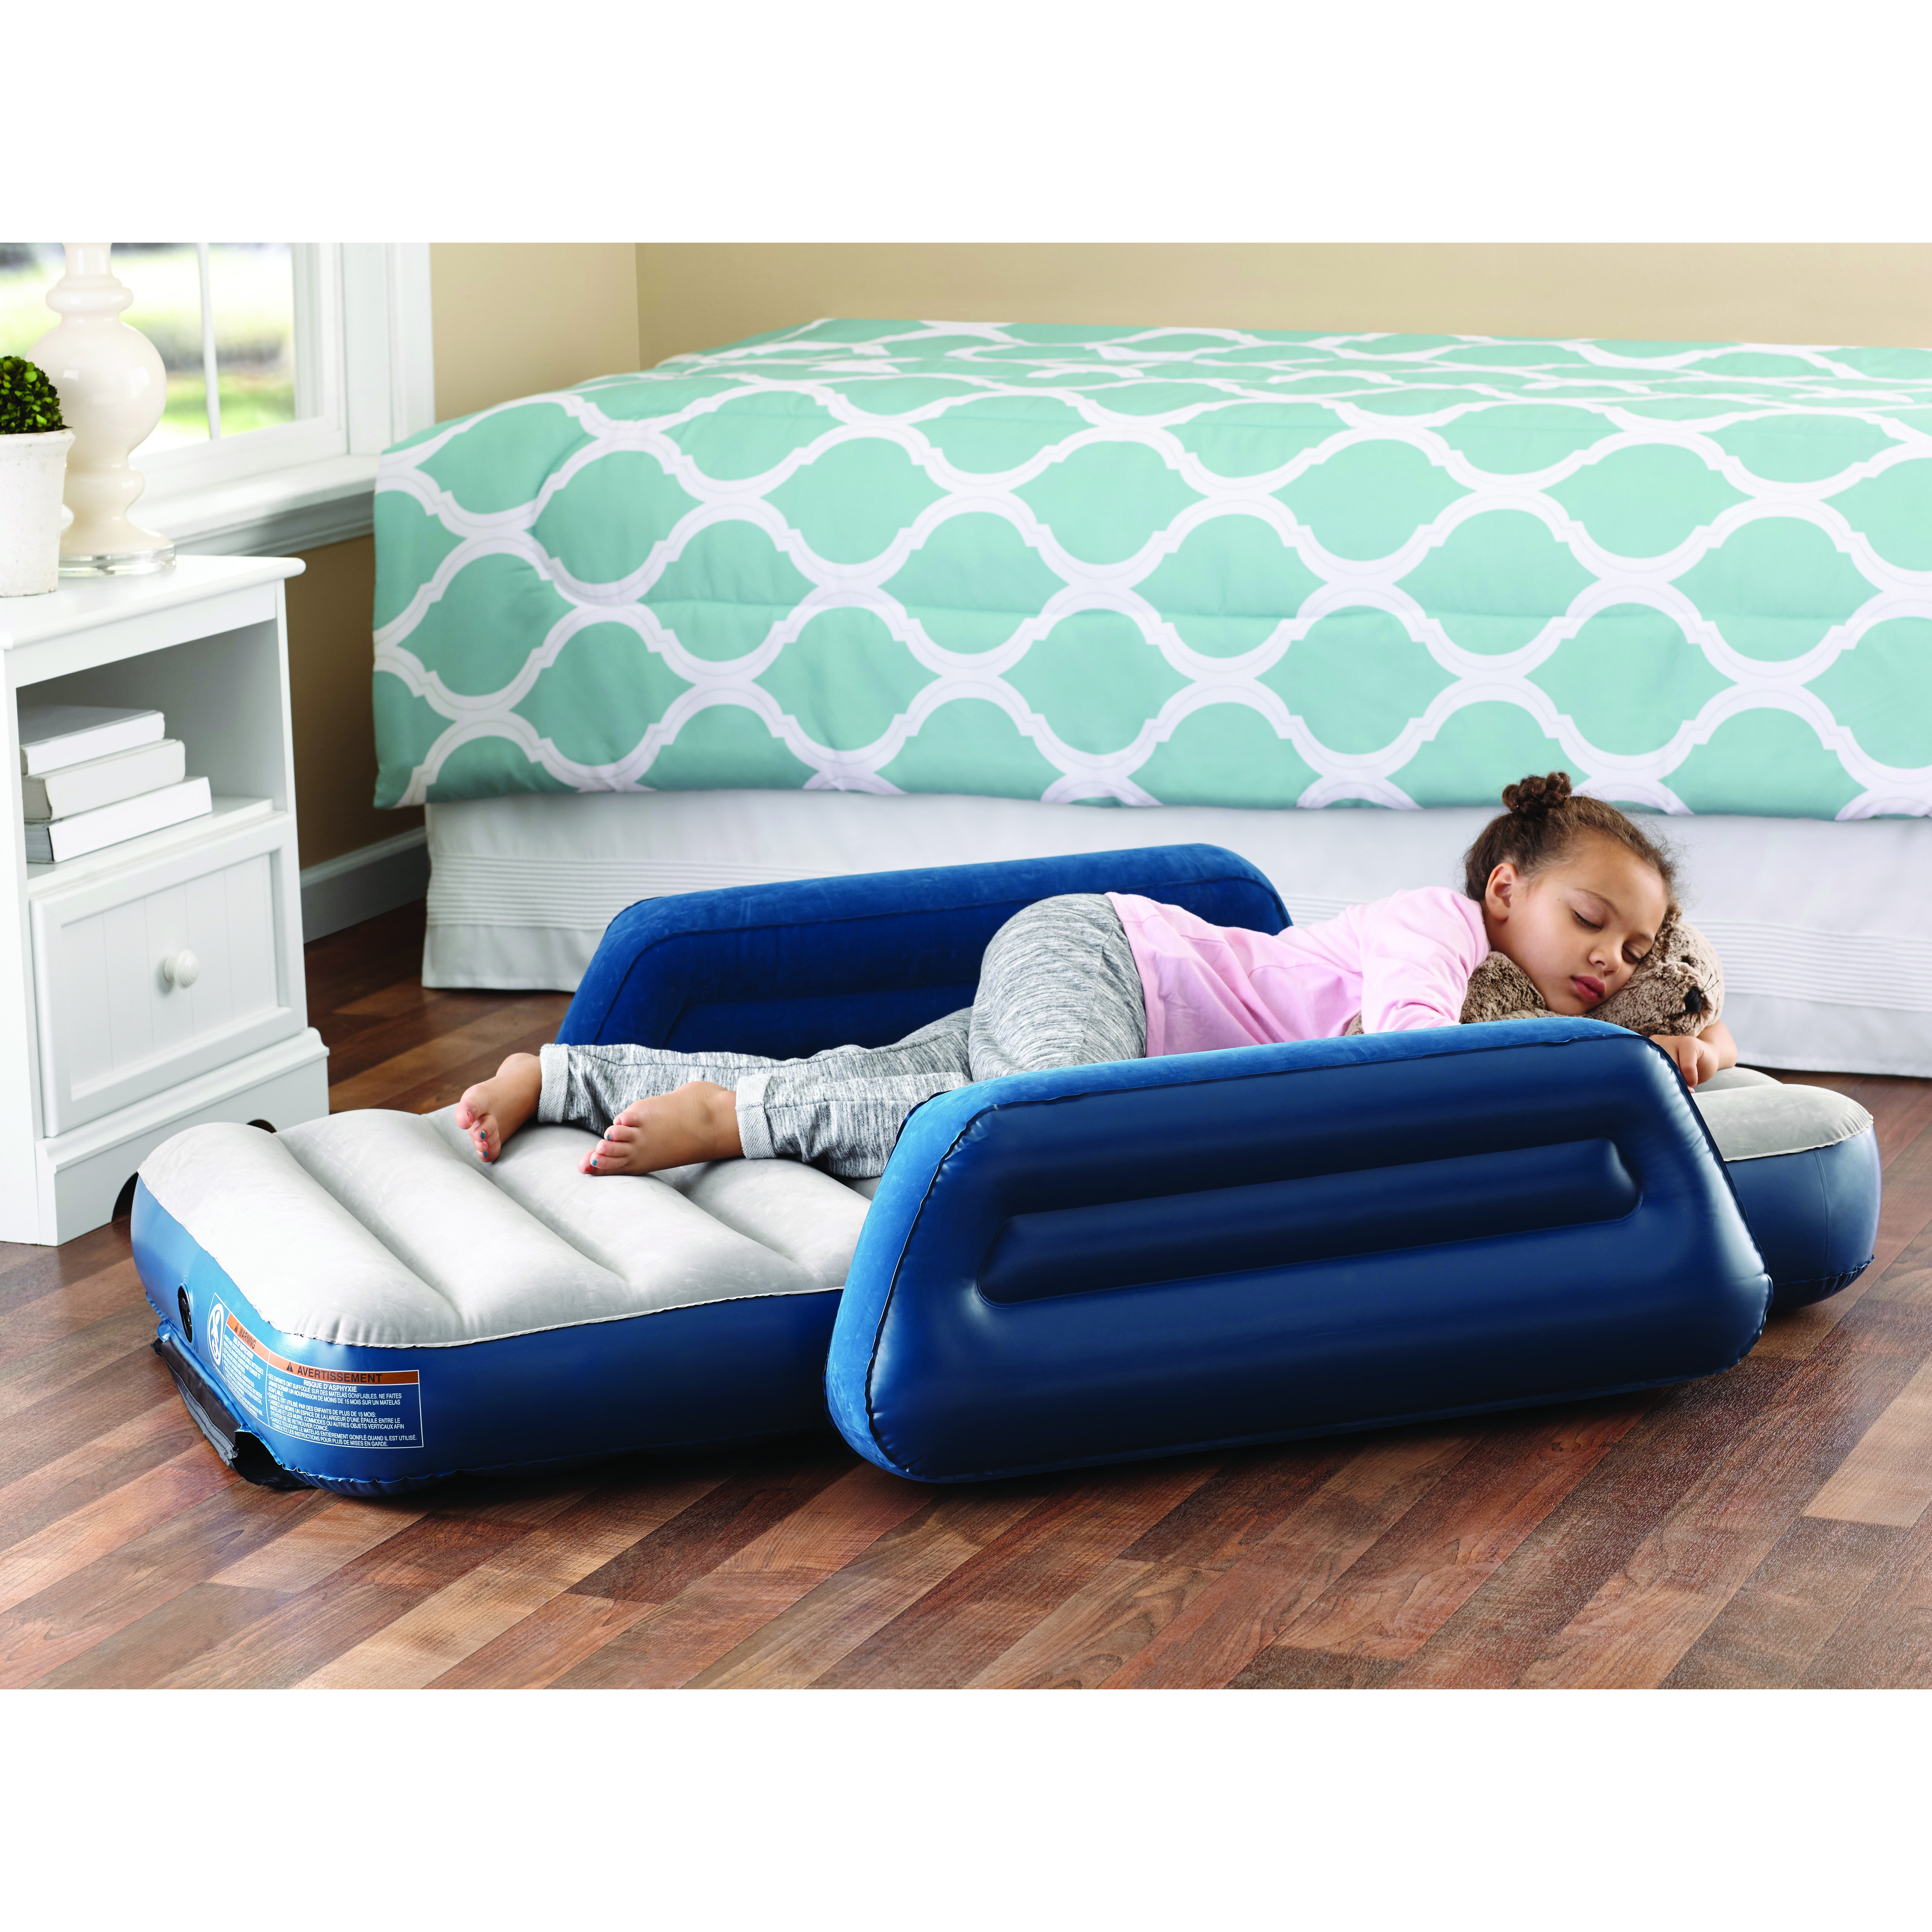 Ozark Trail Kids Camping Airbed w/ Travel Bag – Only $19.96!